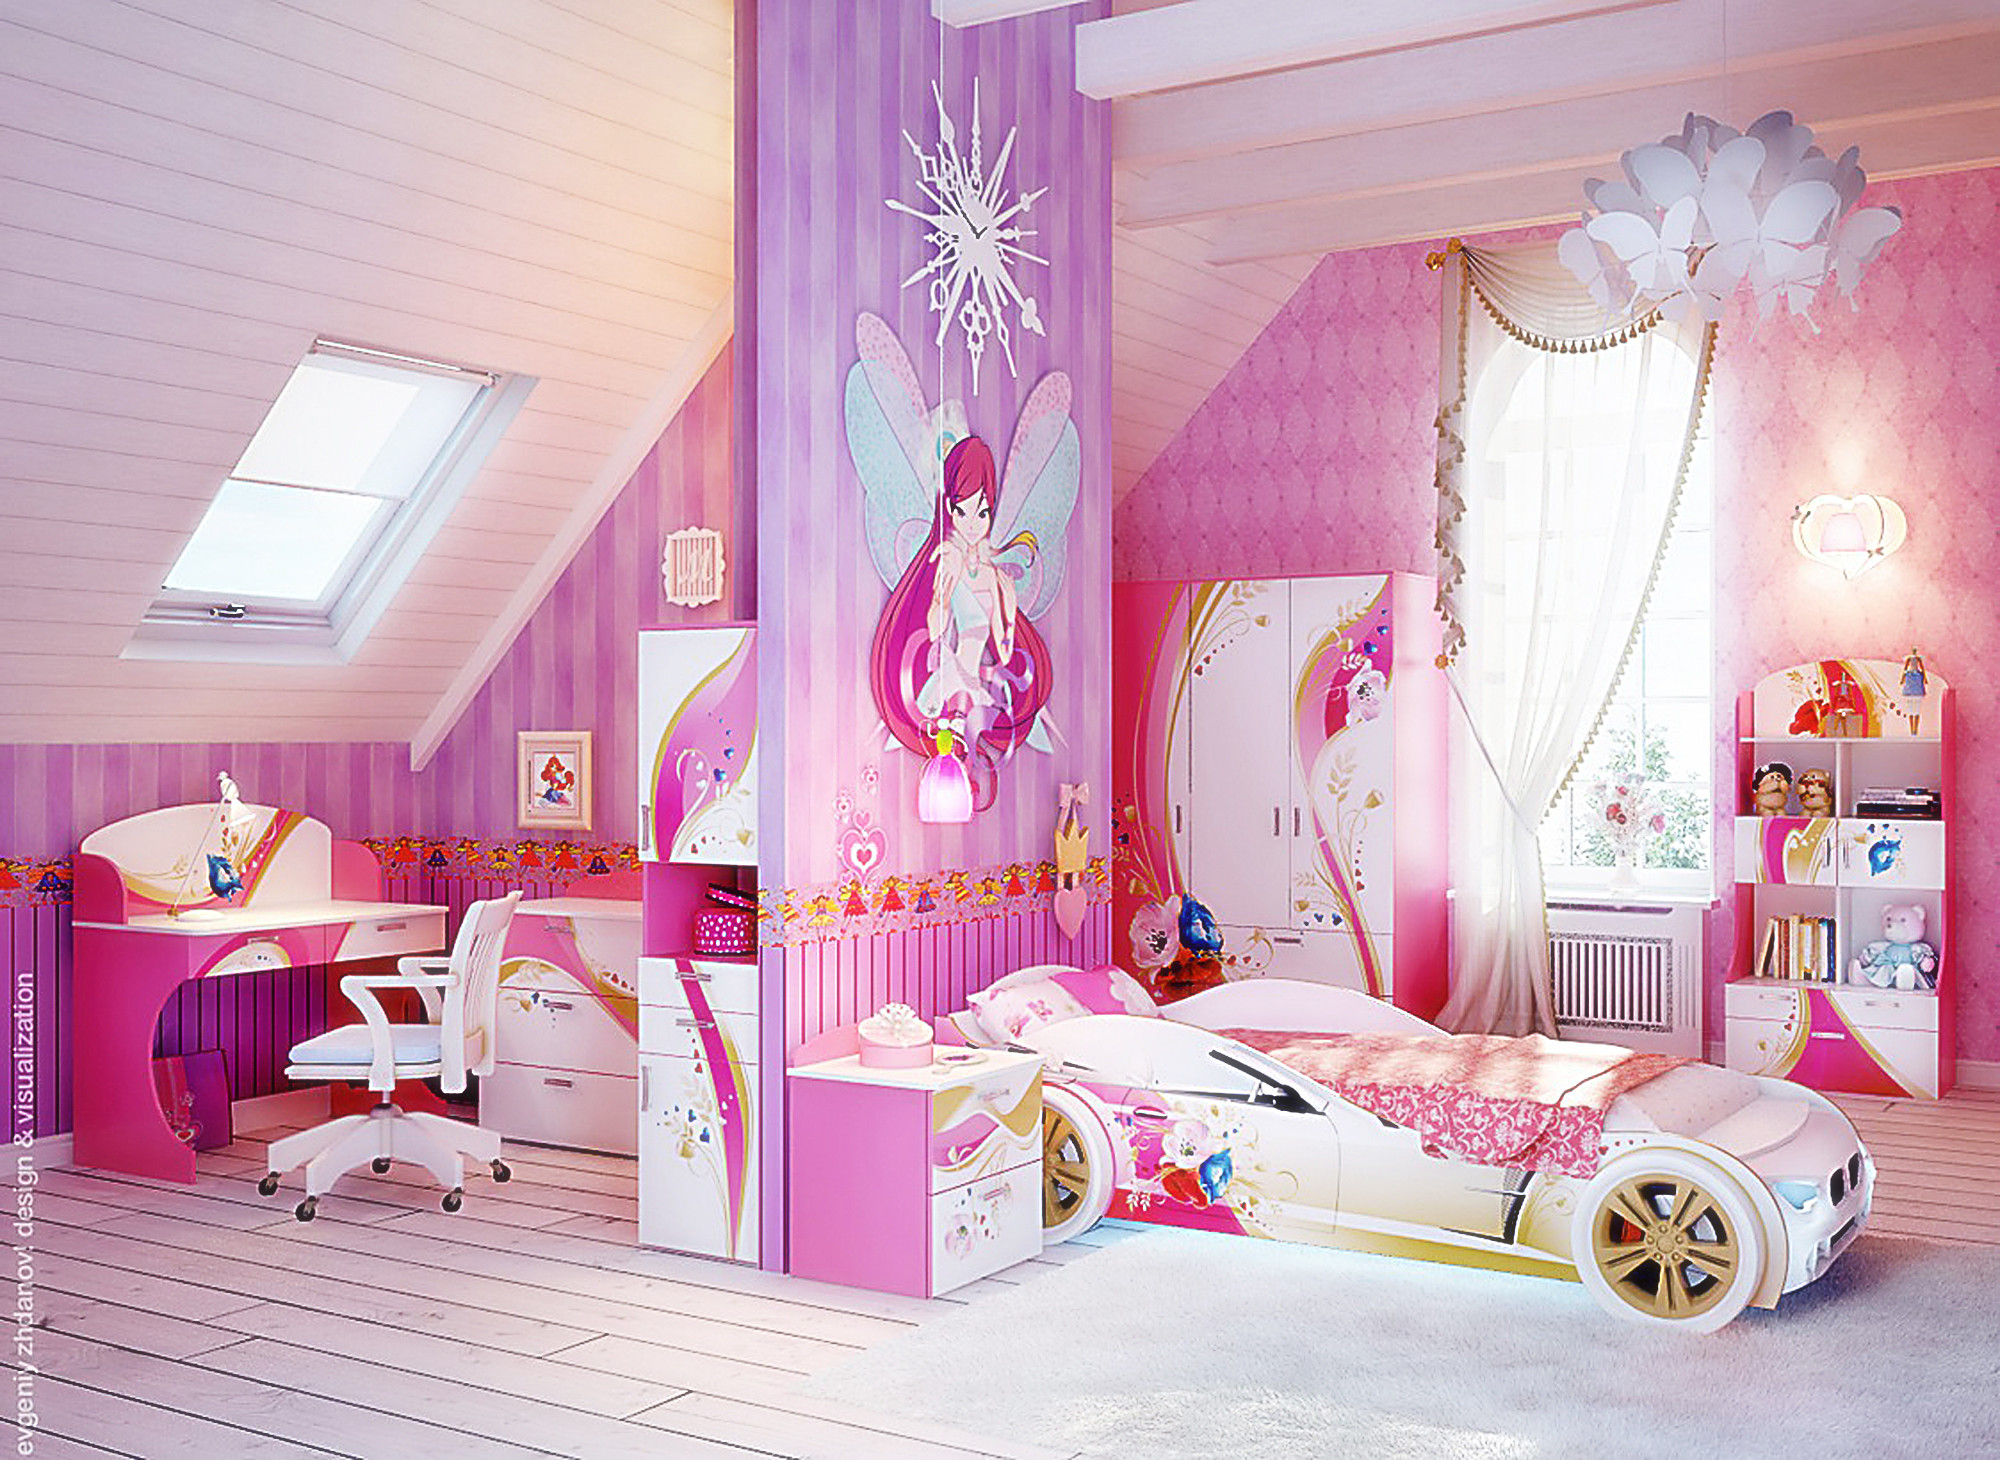 2000x1460 Bedroom Great Black Bay Window Design Idea With White Adorable Fairy Theme Tween  Girl Wall Paint ...